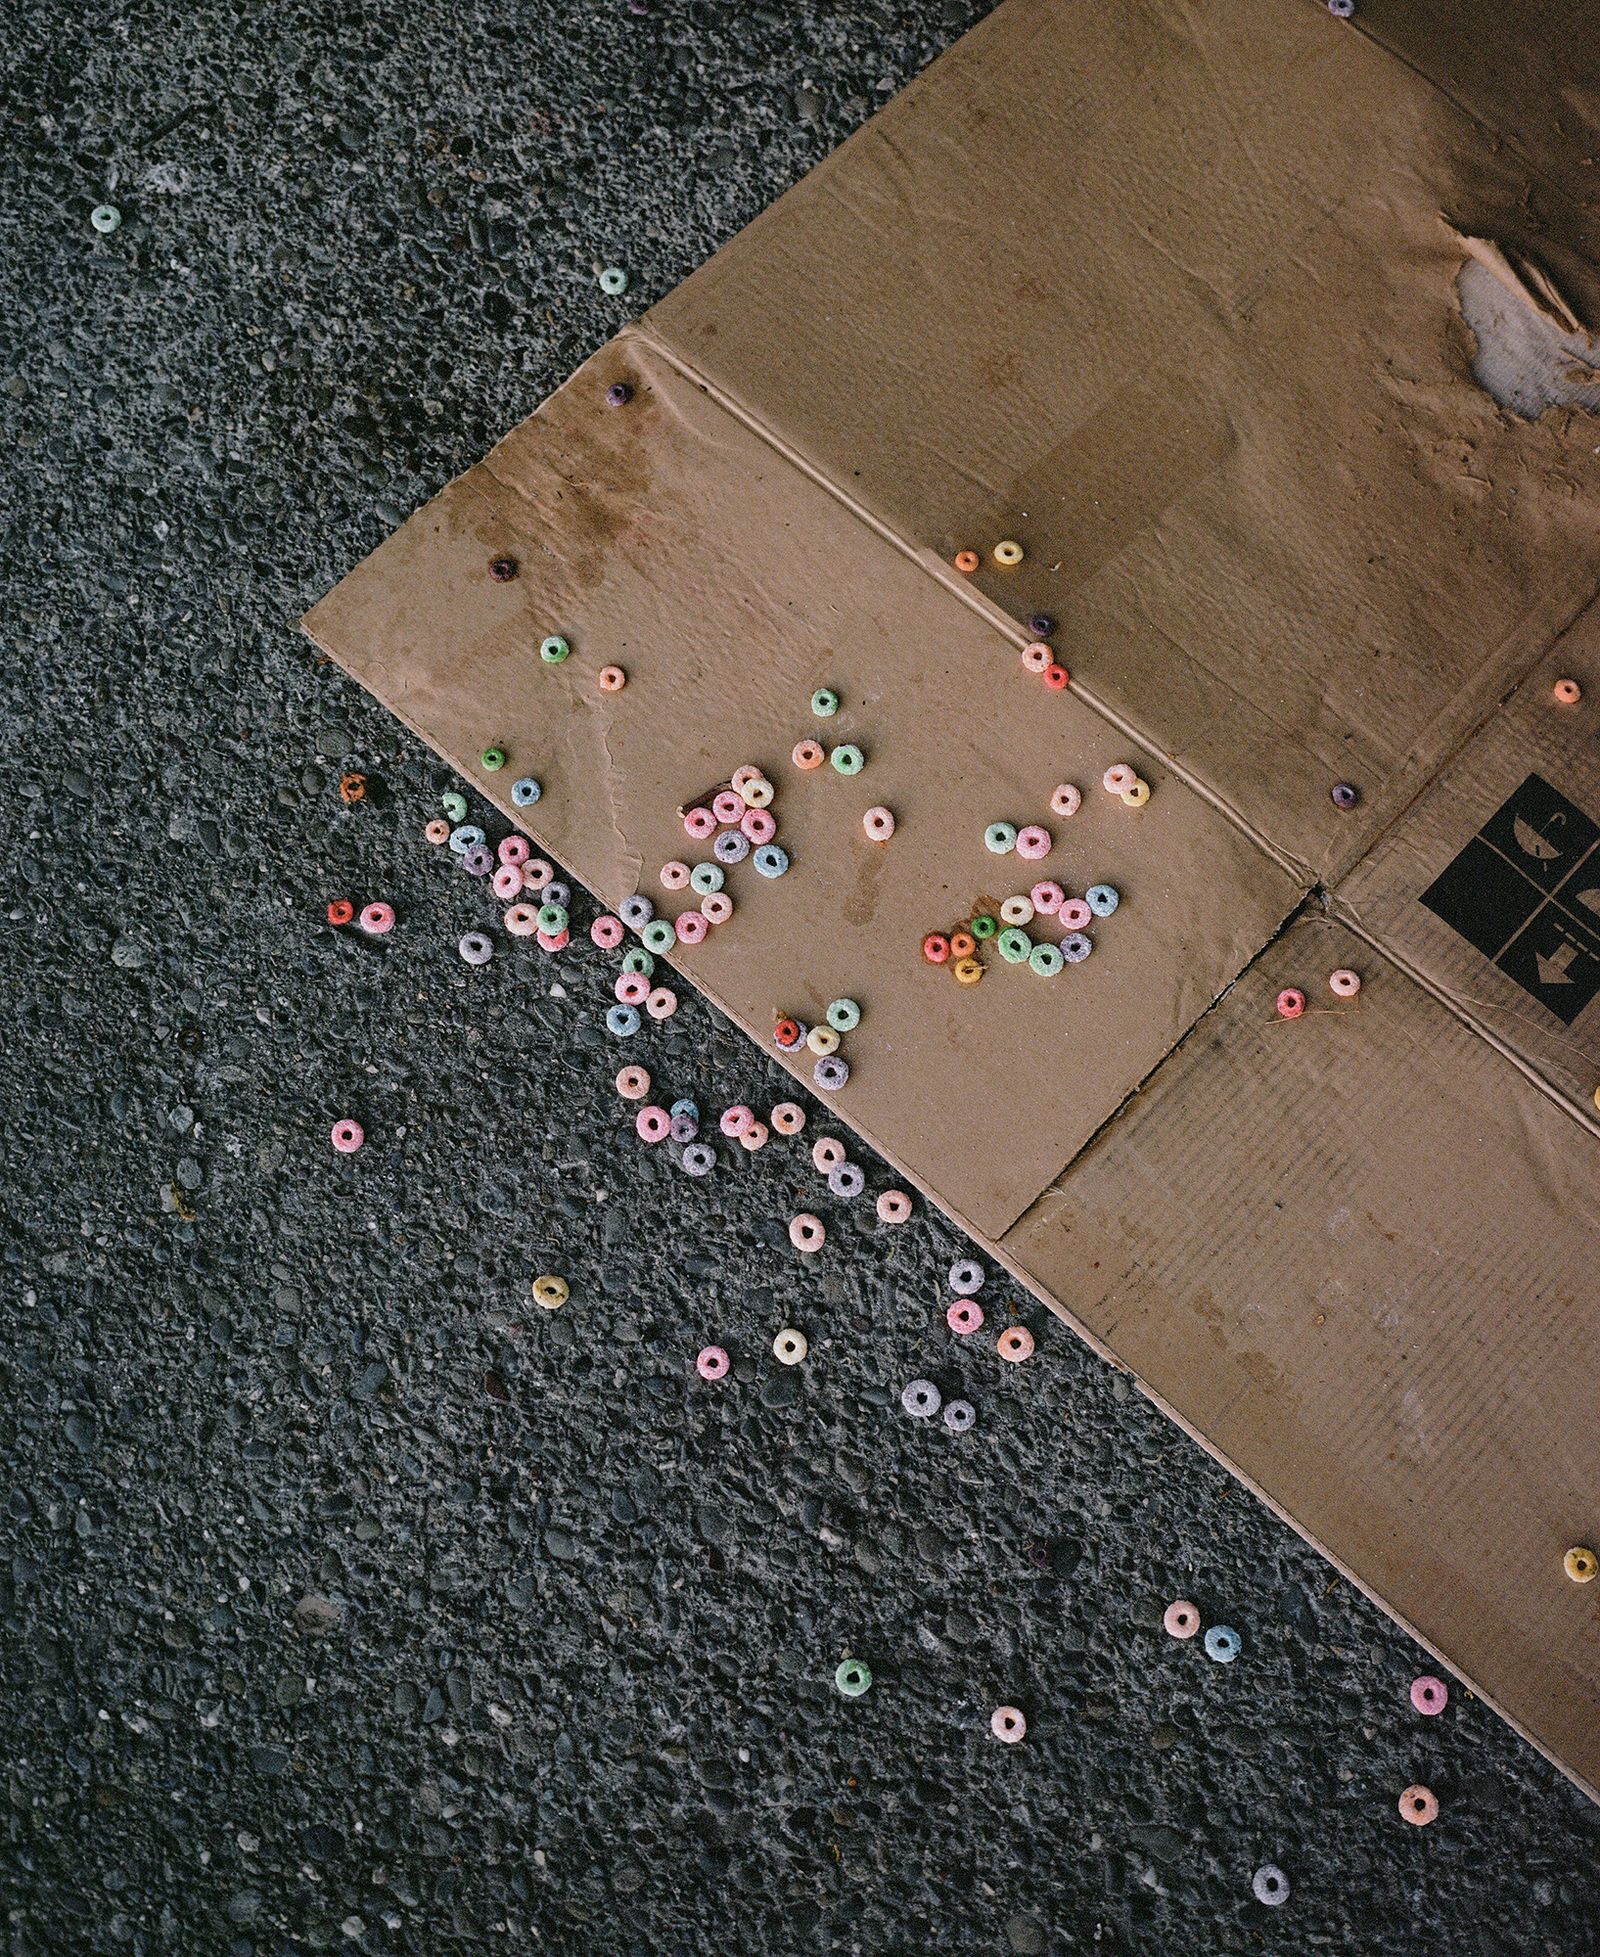 © Justin Maxon - Fruity Loops cereal is seen scattered on cardboard near where a houseless person was previously sleeping.